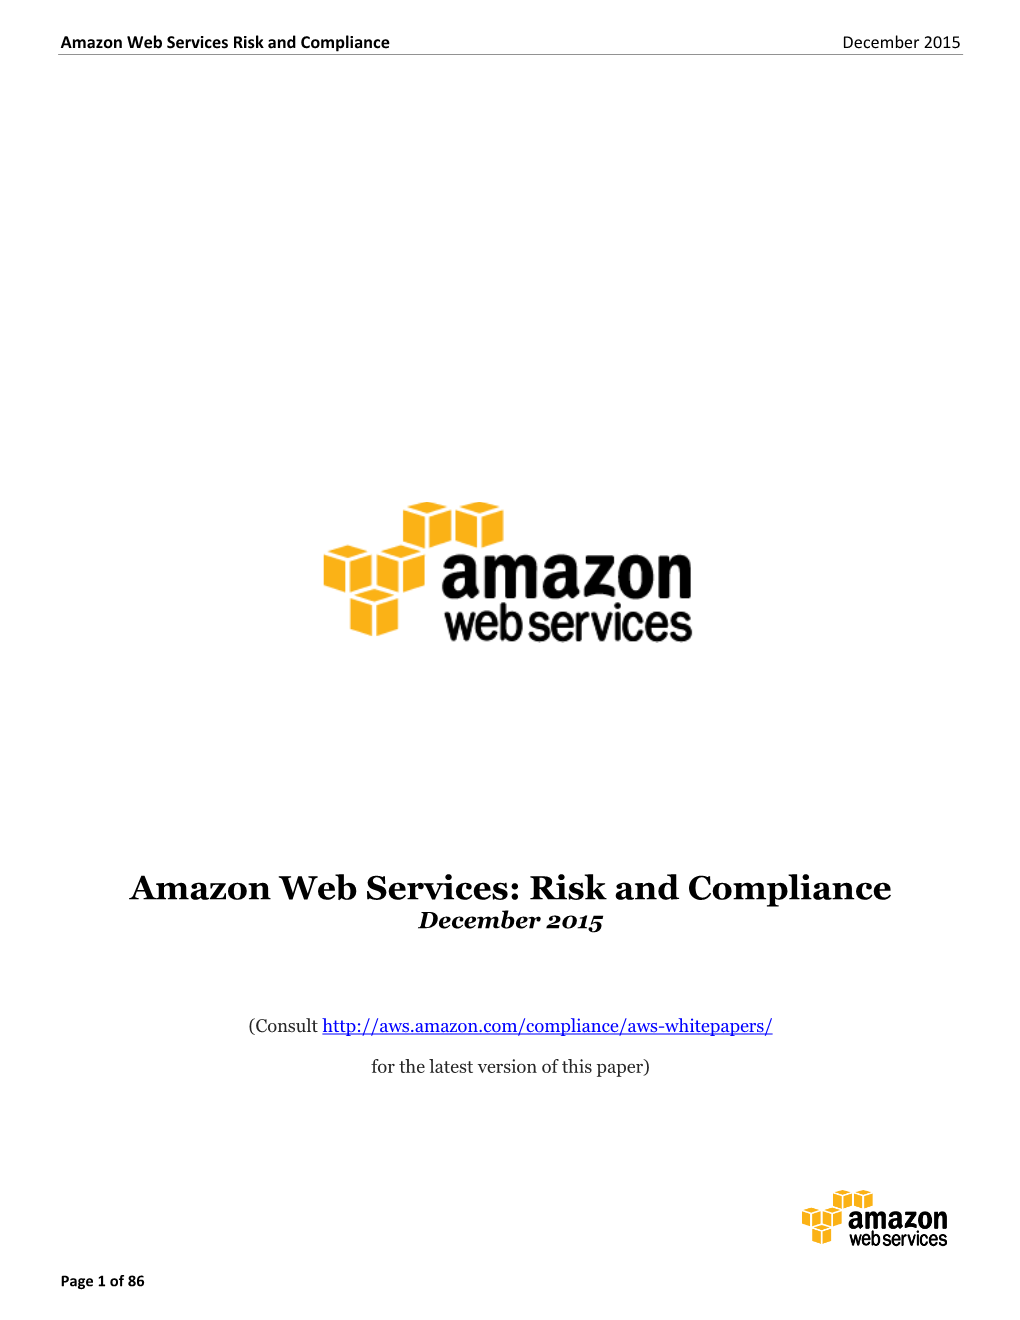 Amazon Web Services: Risk and Compliance December 2015